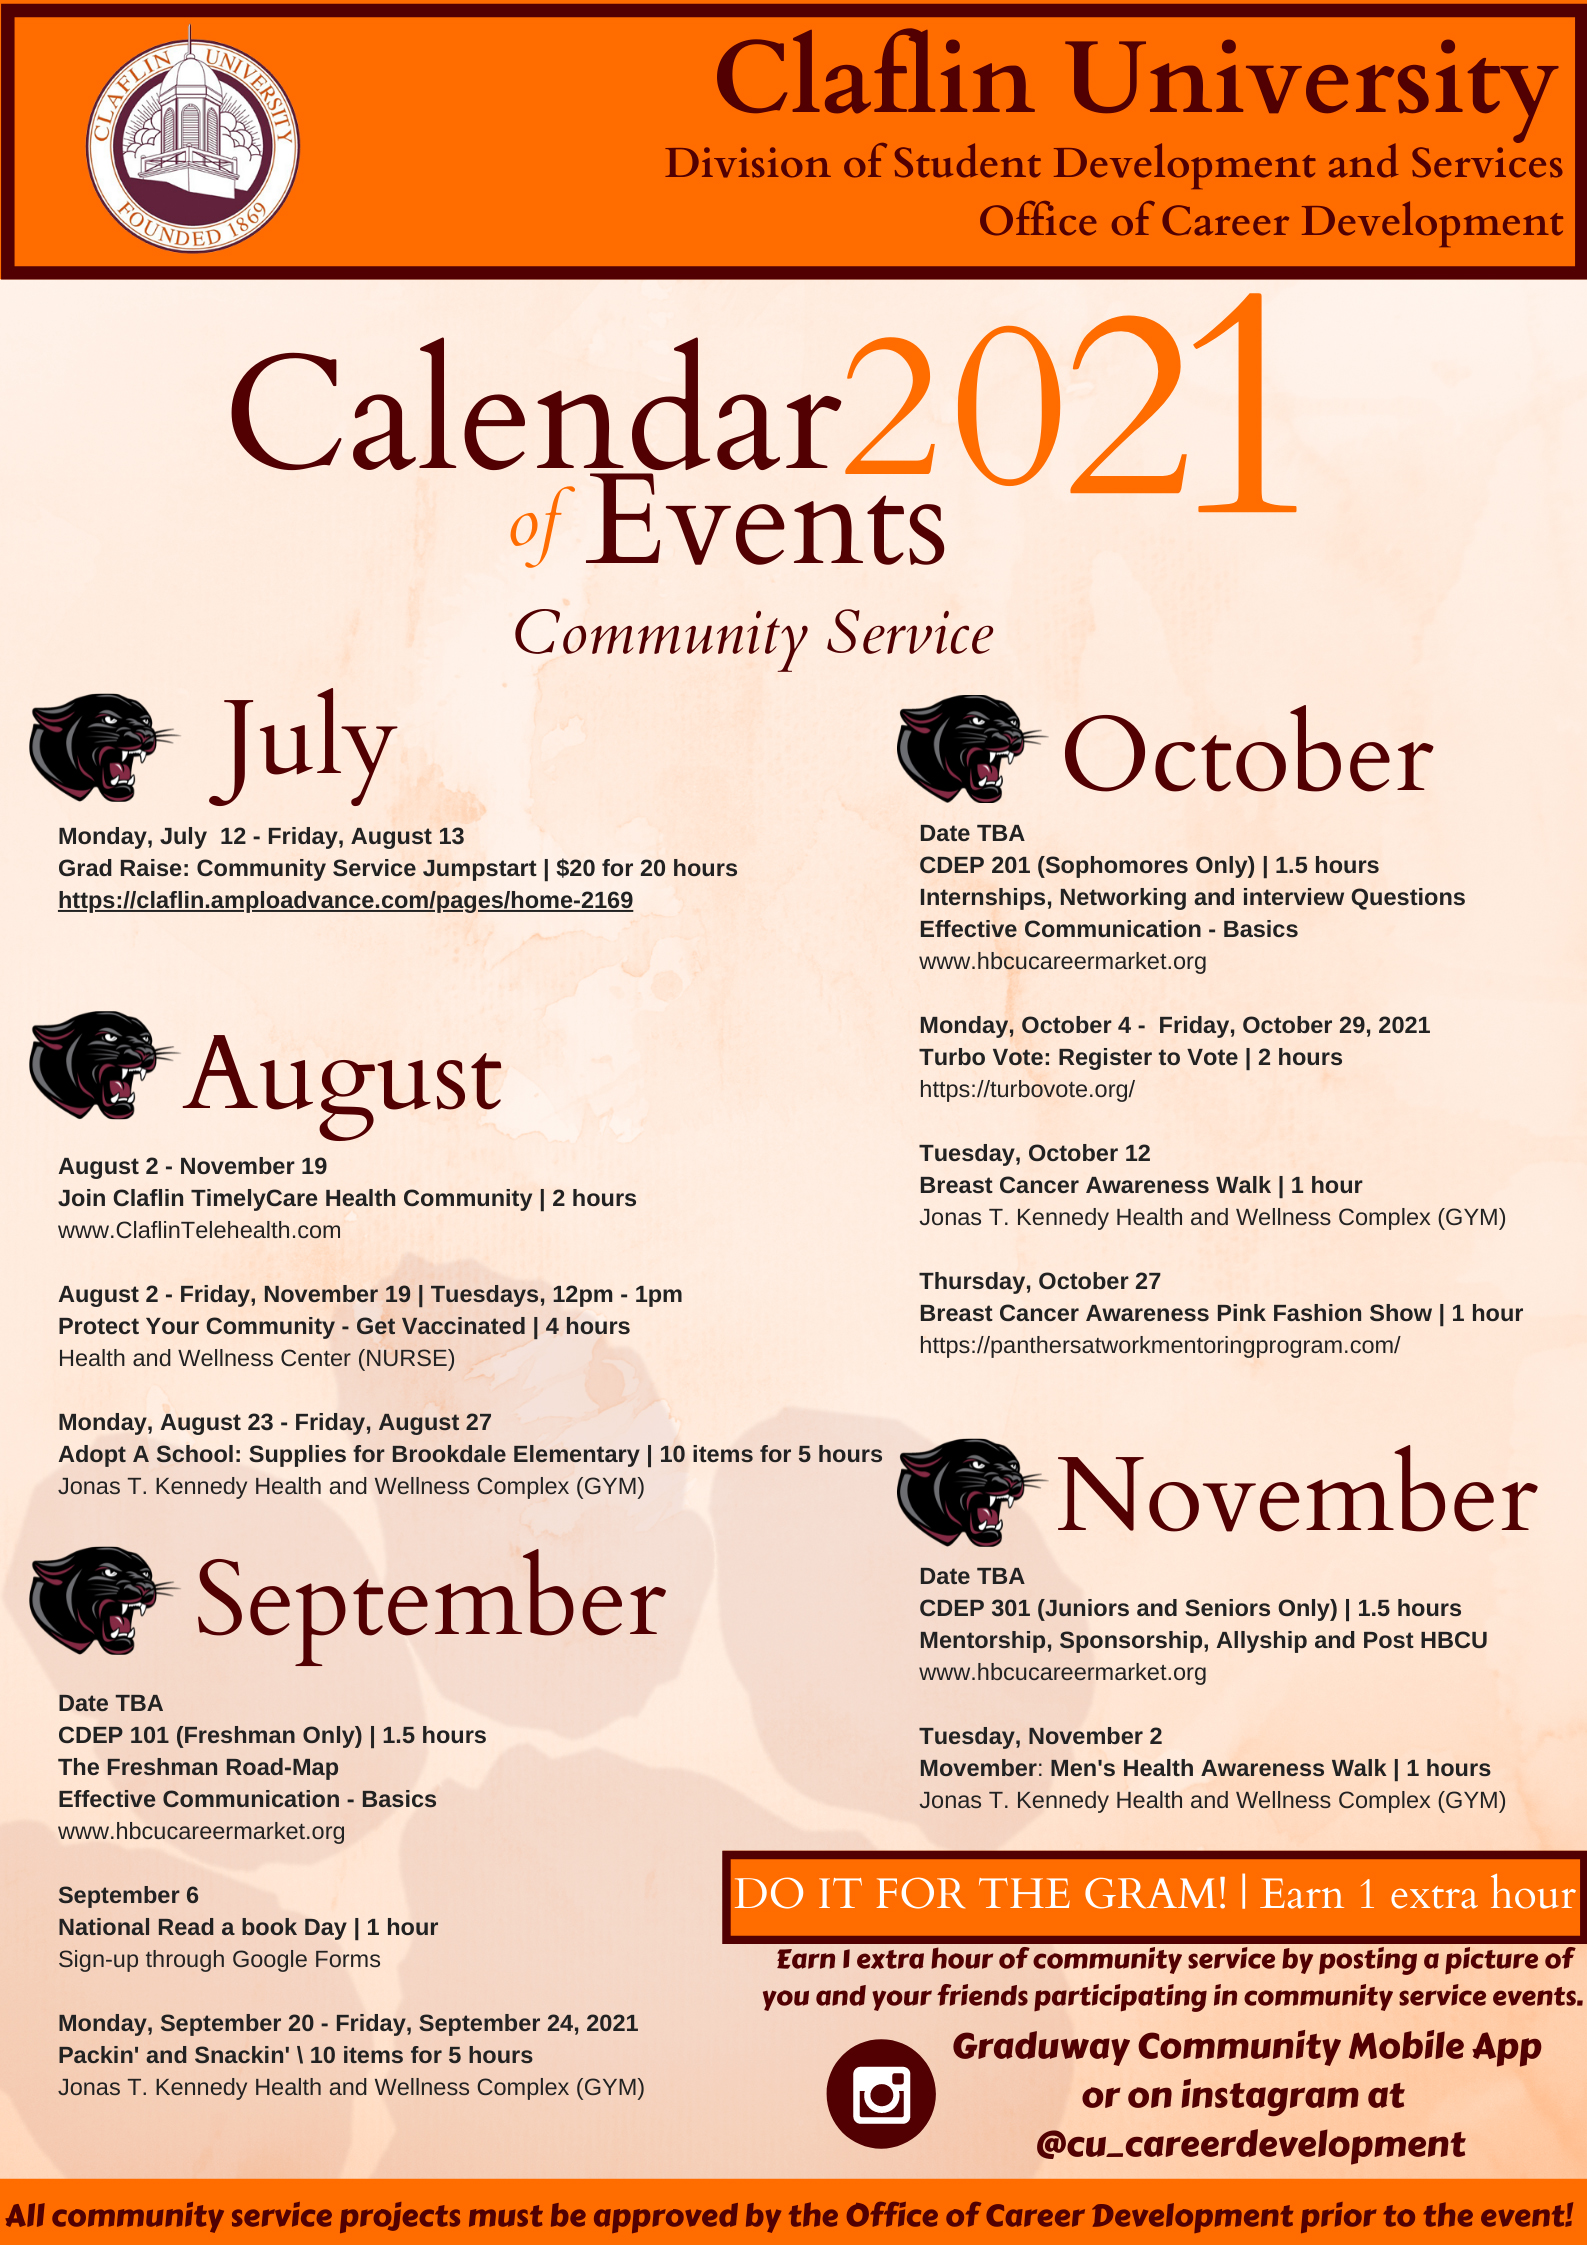 Calendar of Events poster